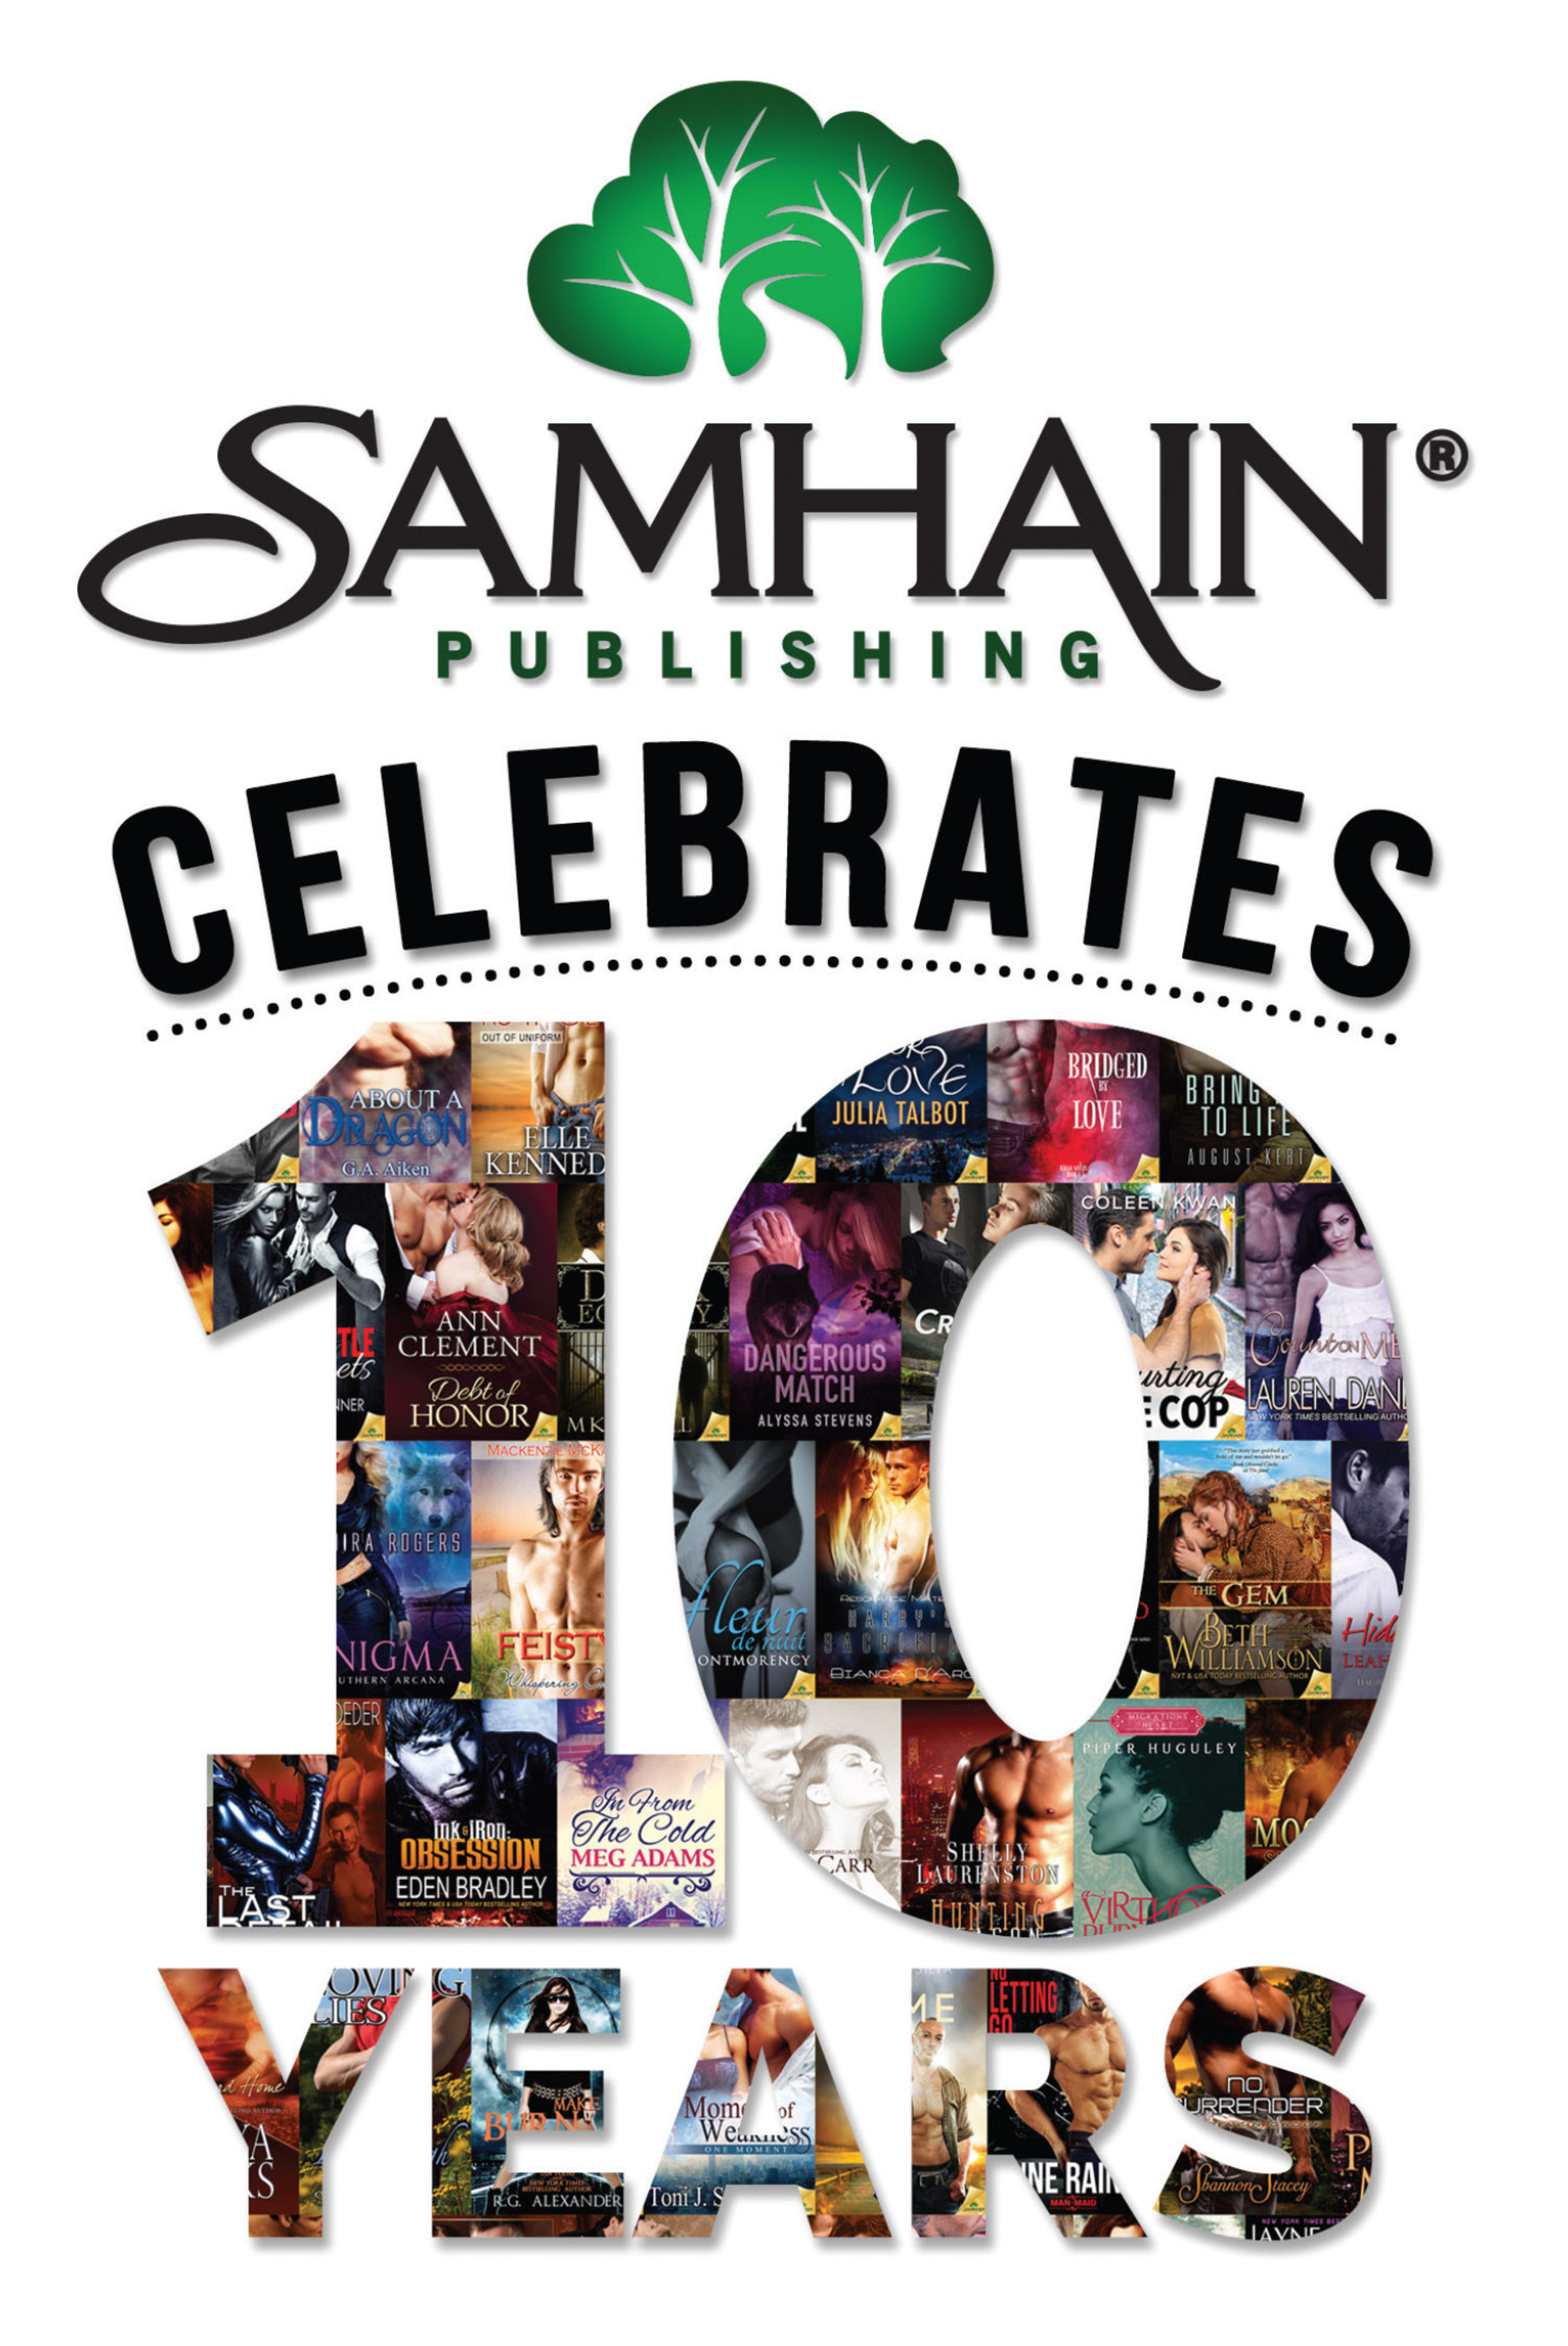 Samhain Publishing celebrates ten years of e-book publishing excellence with month-long events, giveaways and more starting Nov. 1